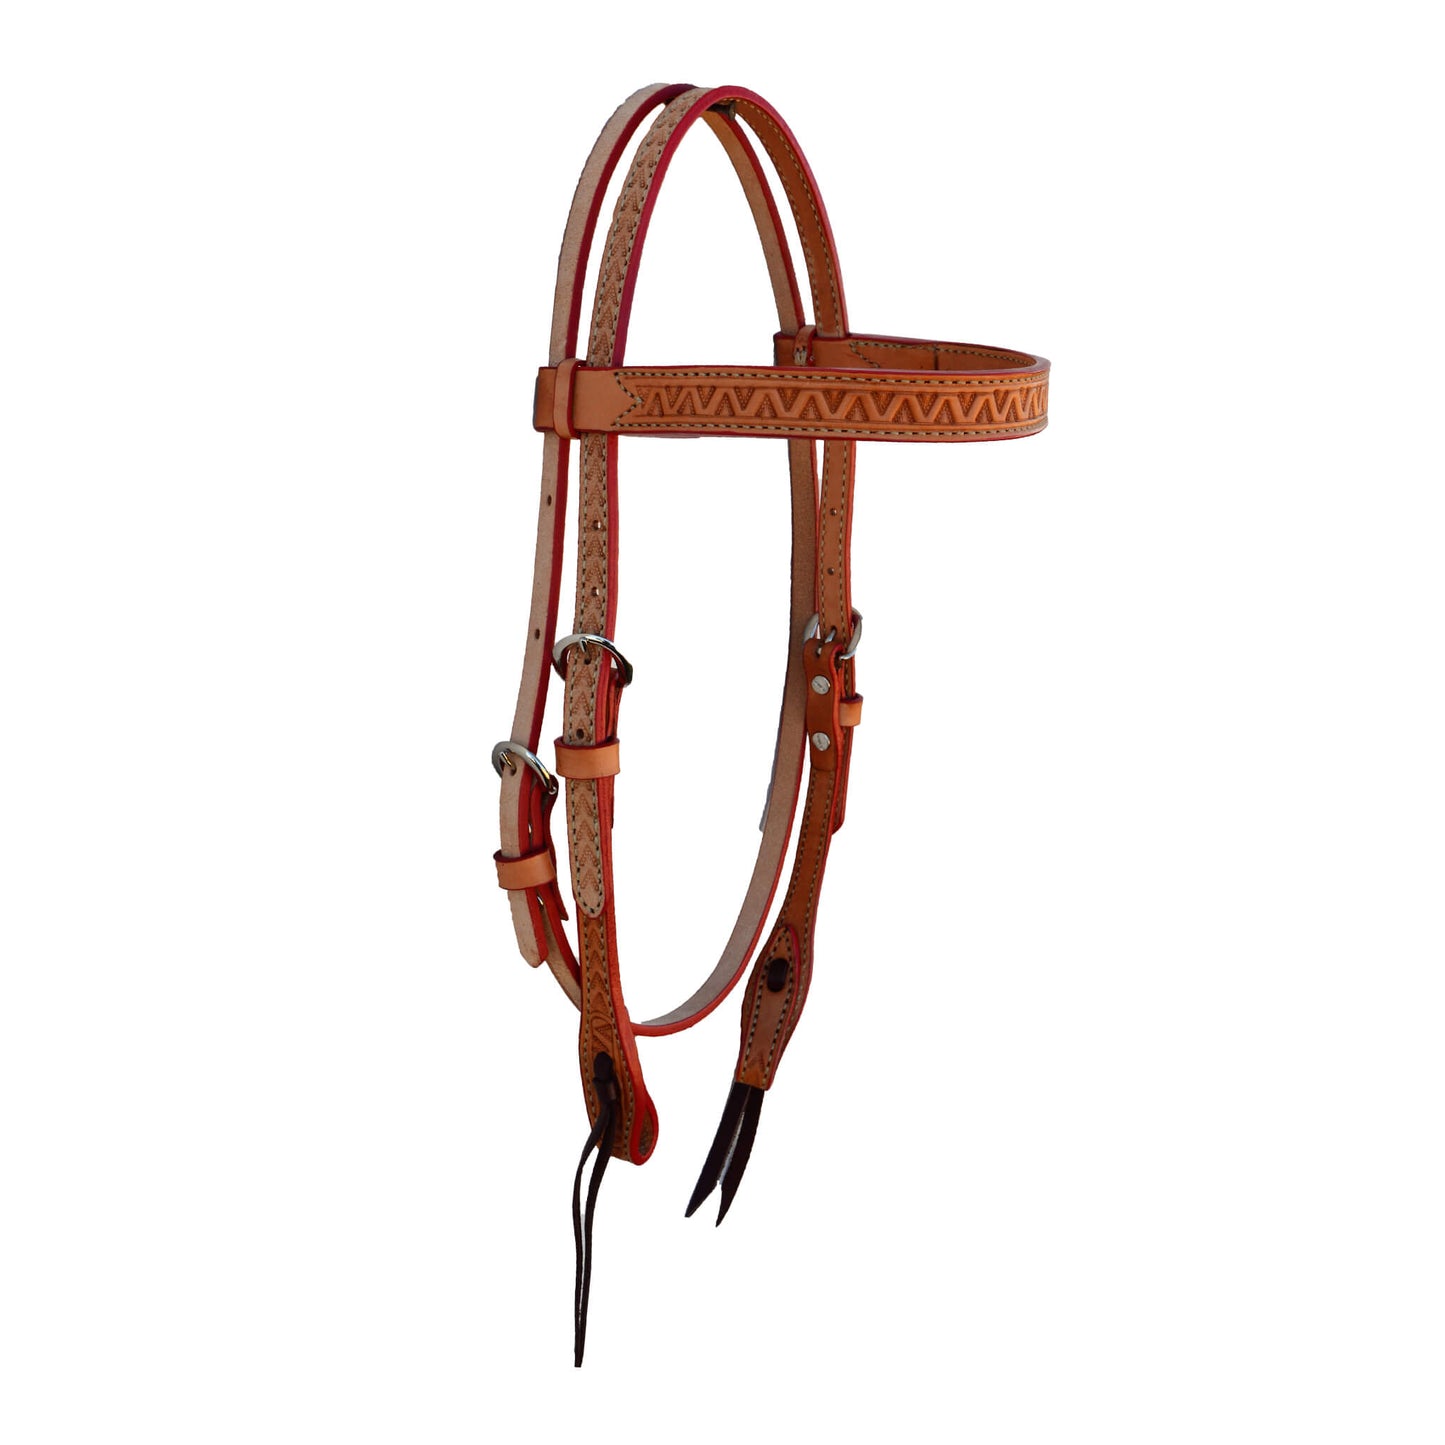 1" Straight browband headstall golden leather V shape tooling with red ink.